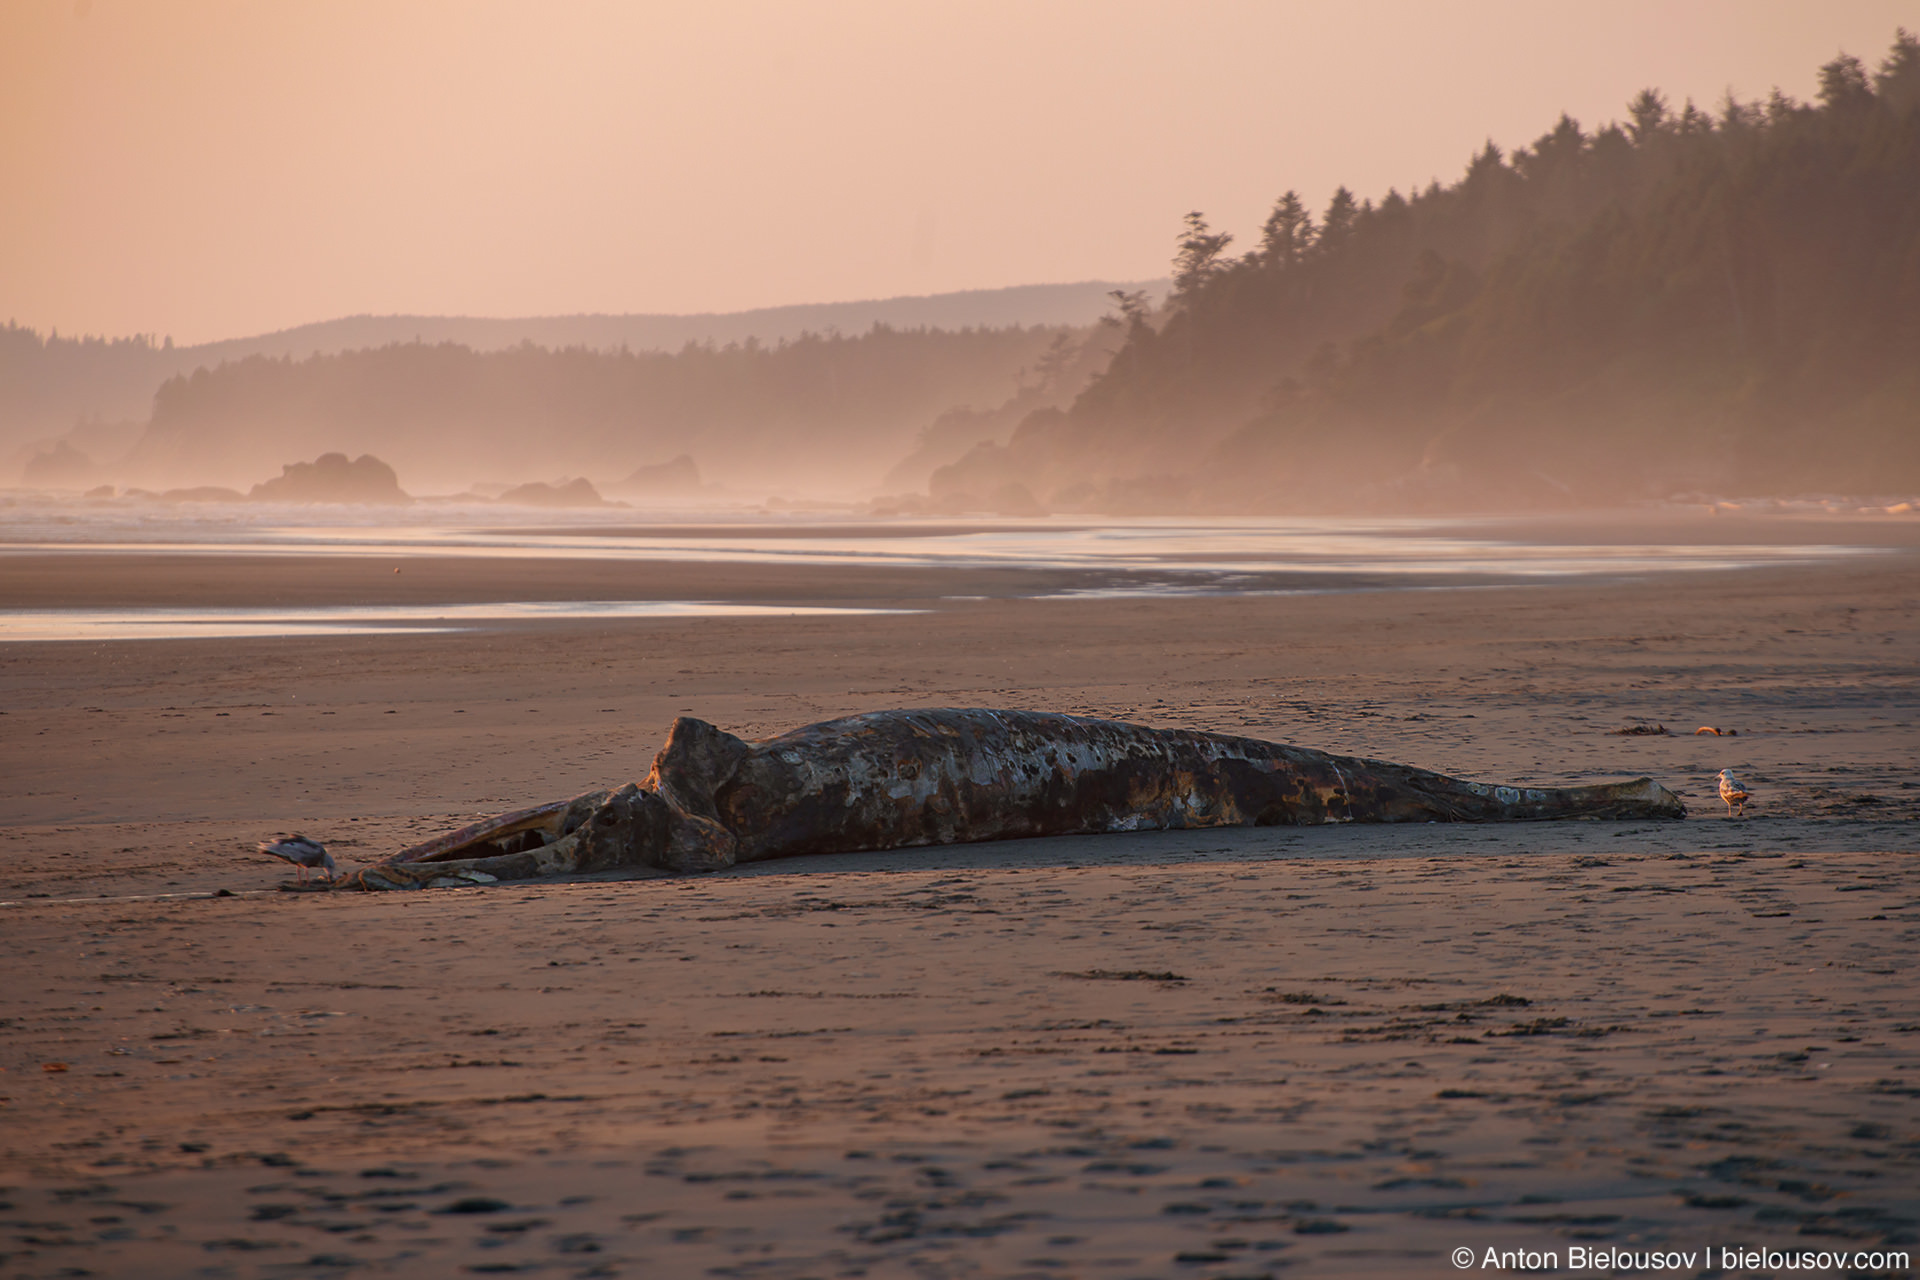 Beached Whale at Kalaloch Beach, Olympic NP